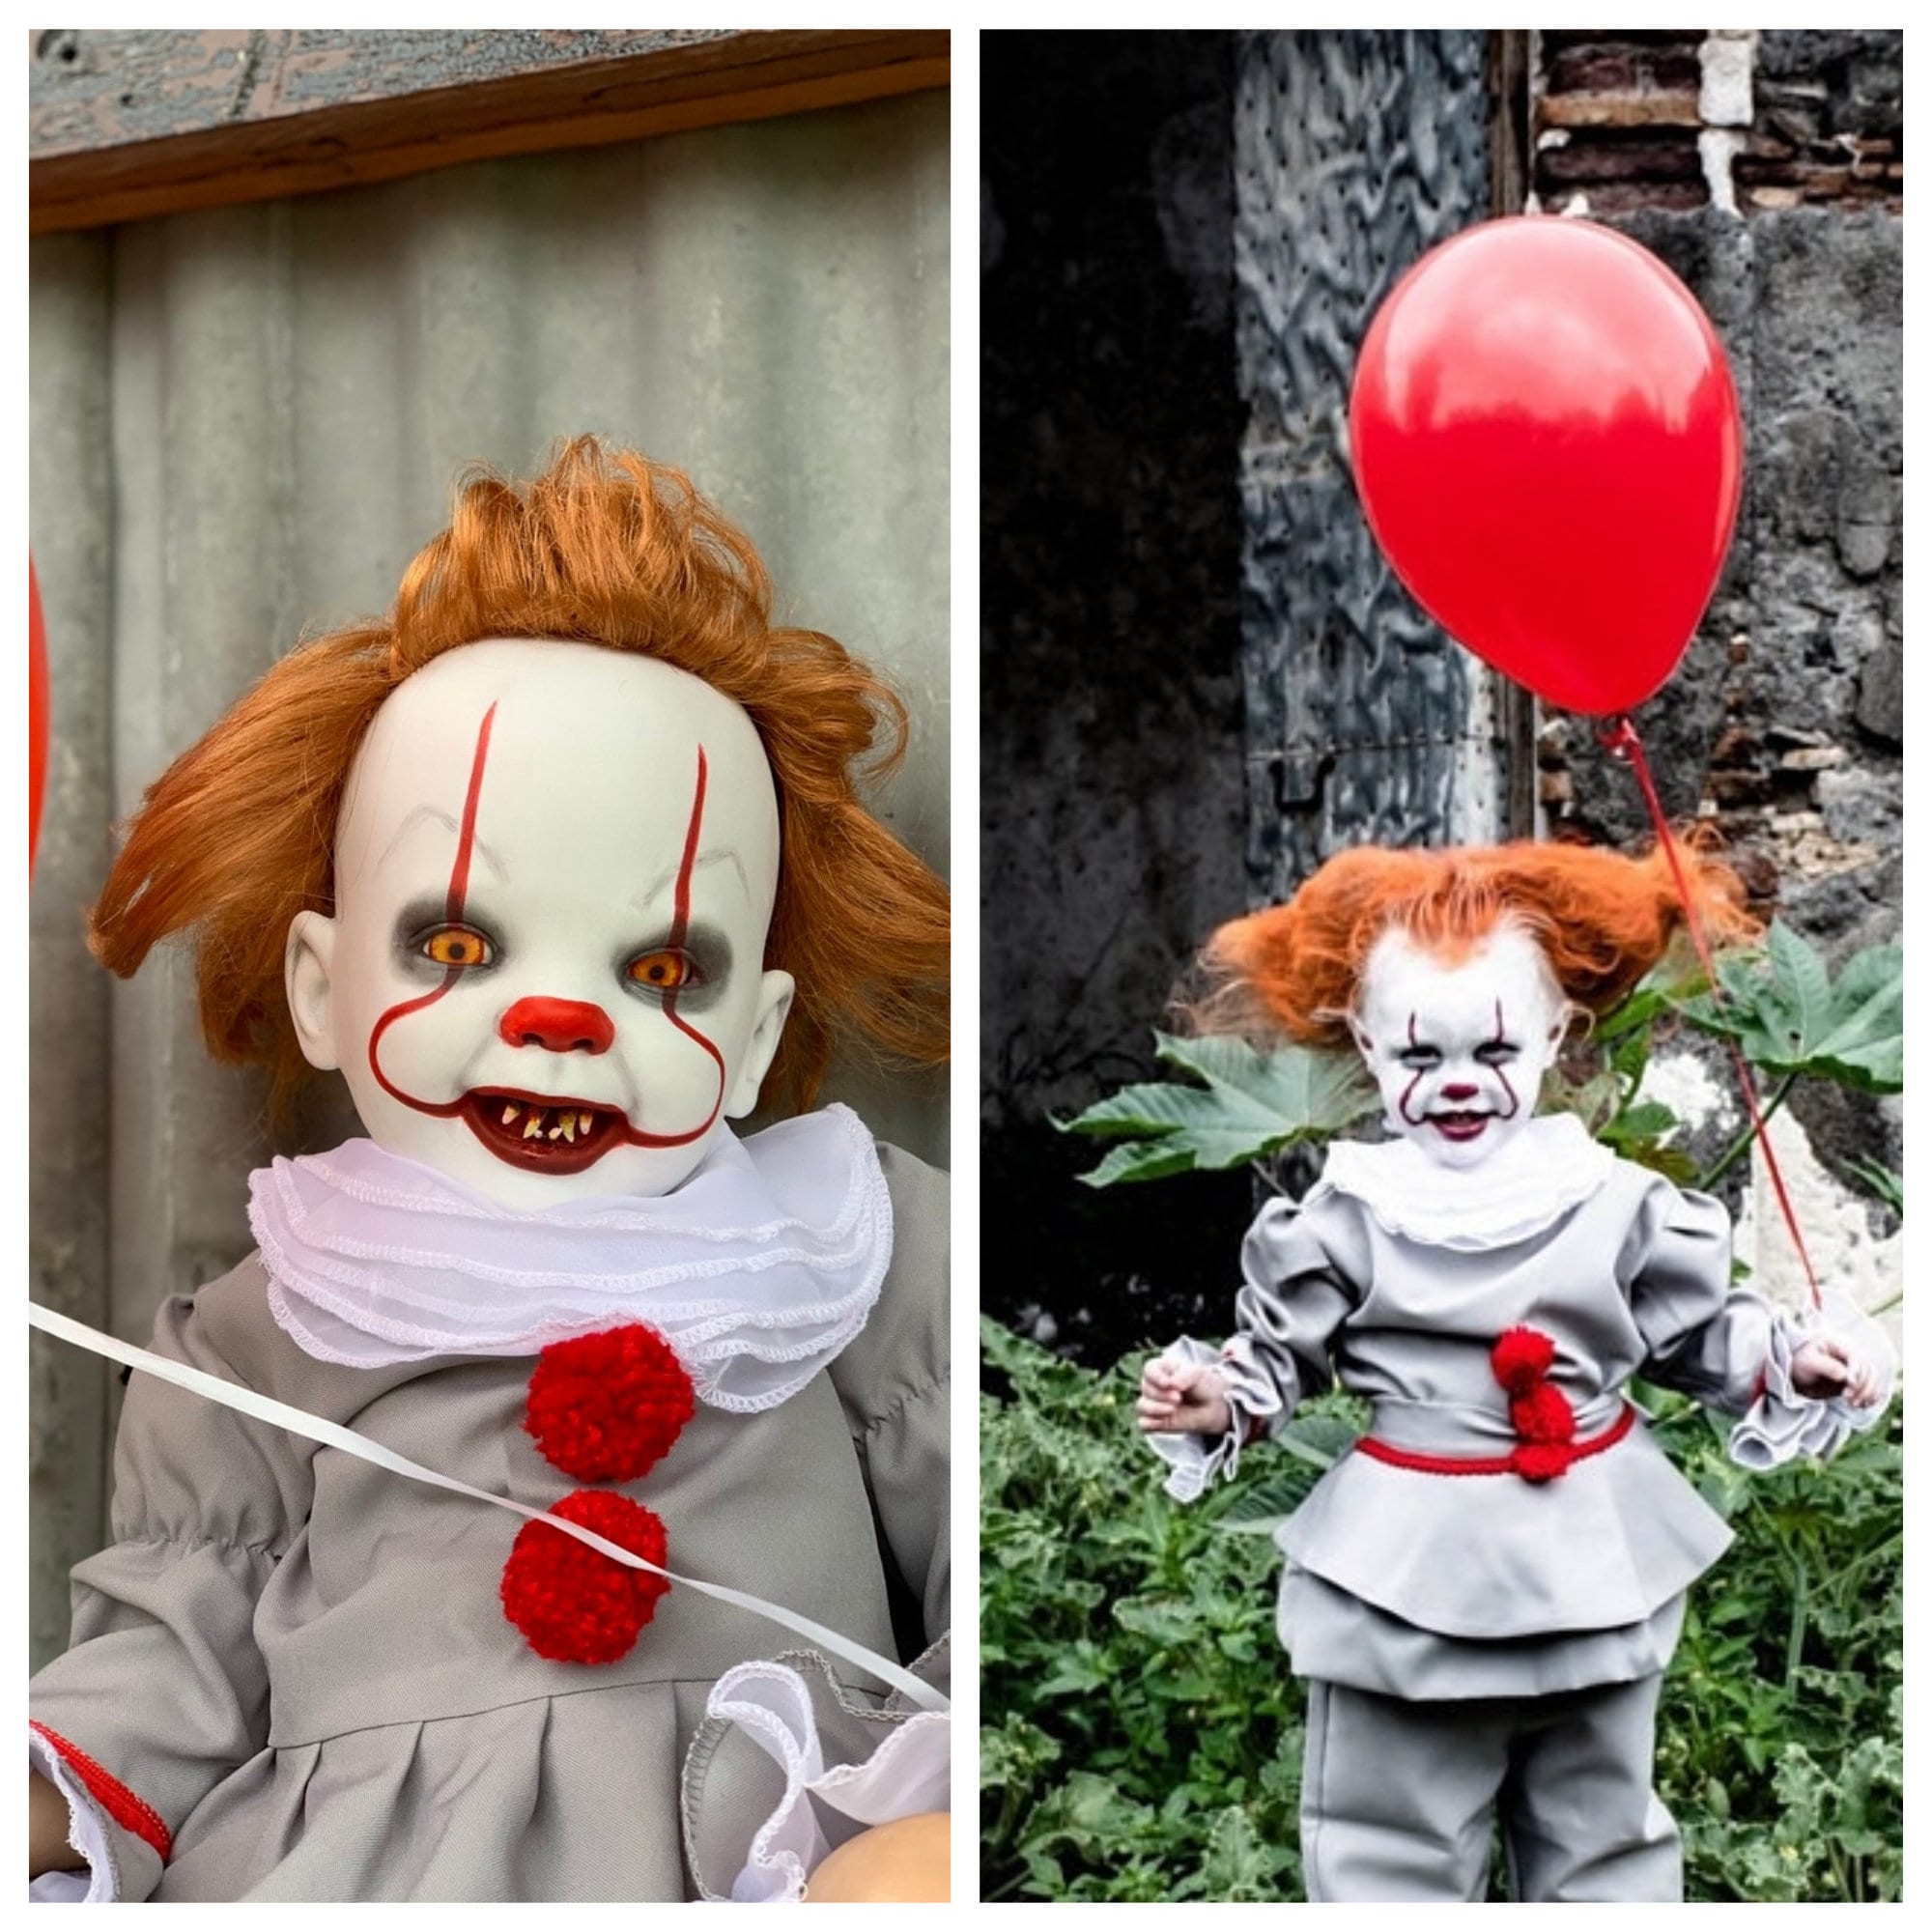 Pennywise costume cosplay costume pennywise halloween costume kids hallowee...